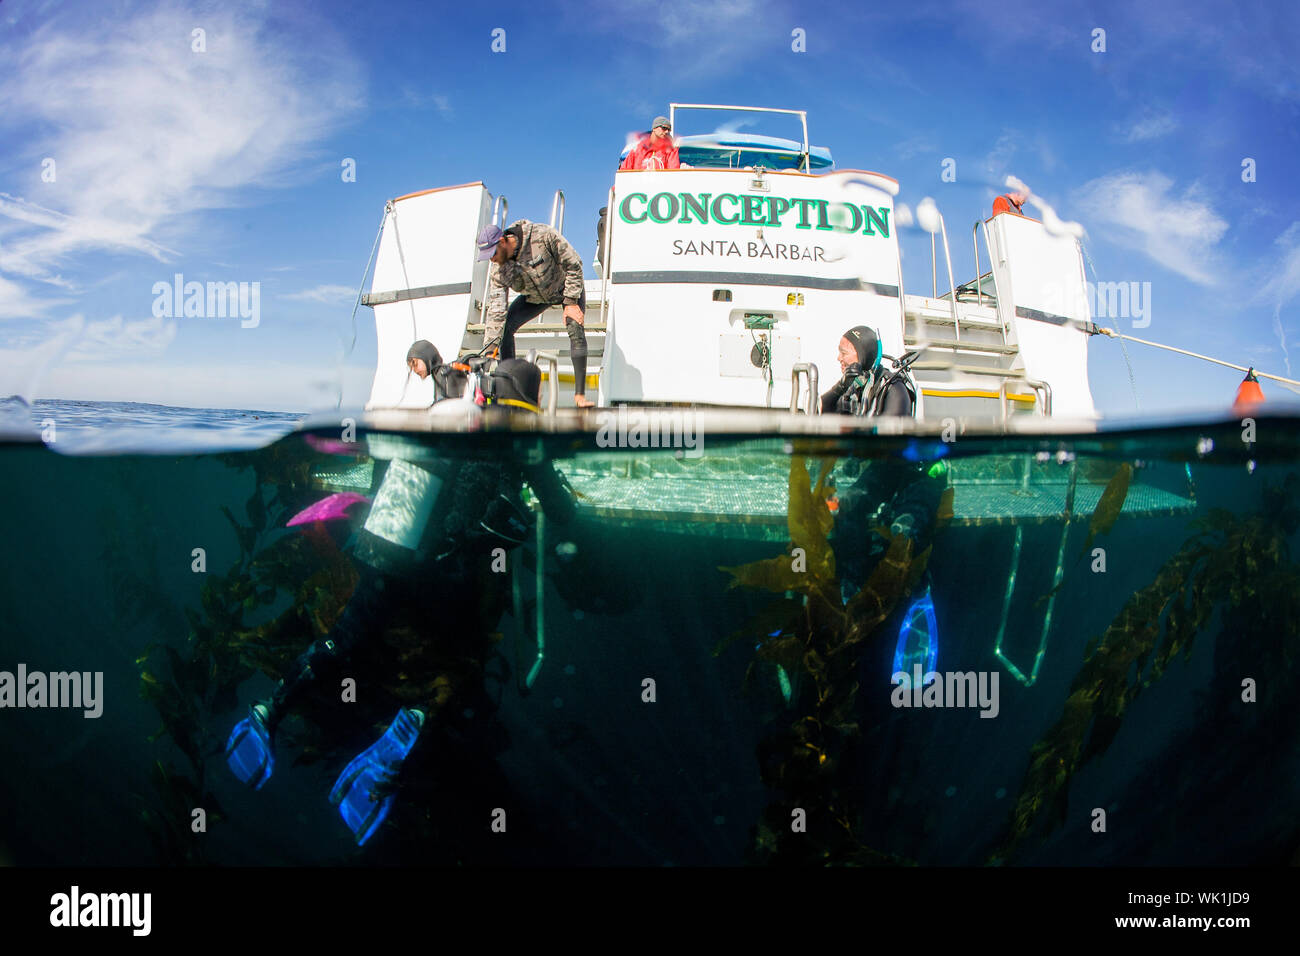 Truth Aquatics SCUBA dive boat the Conception was burned while at sea on September 2, 2019.  The tragic event killed 34 passengers. Stock Photo